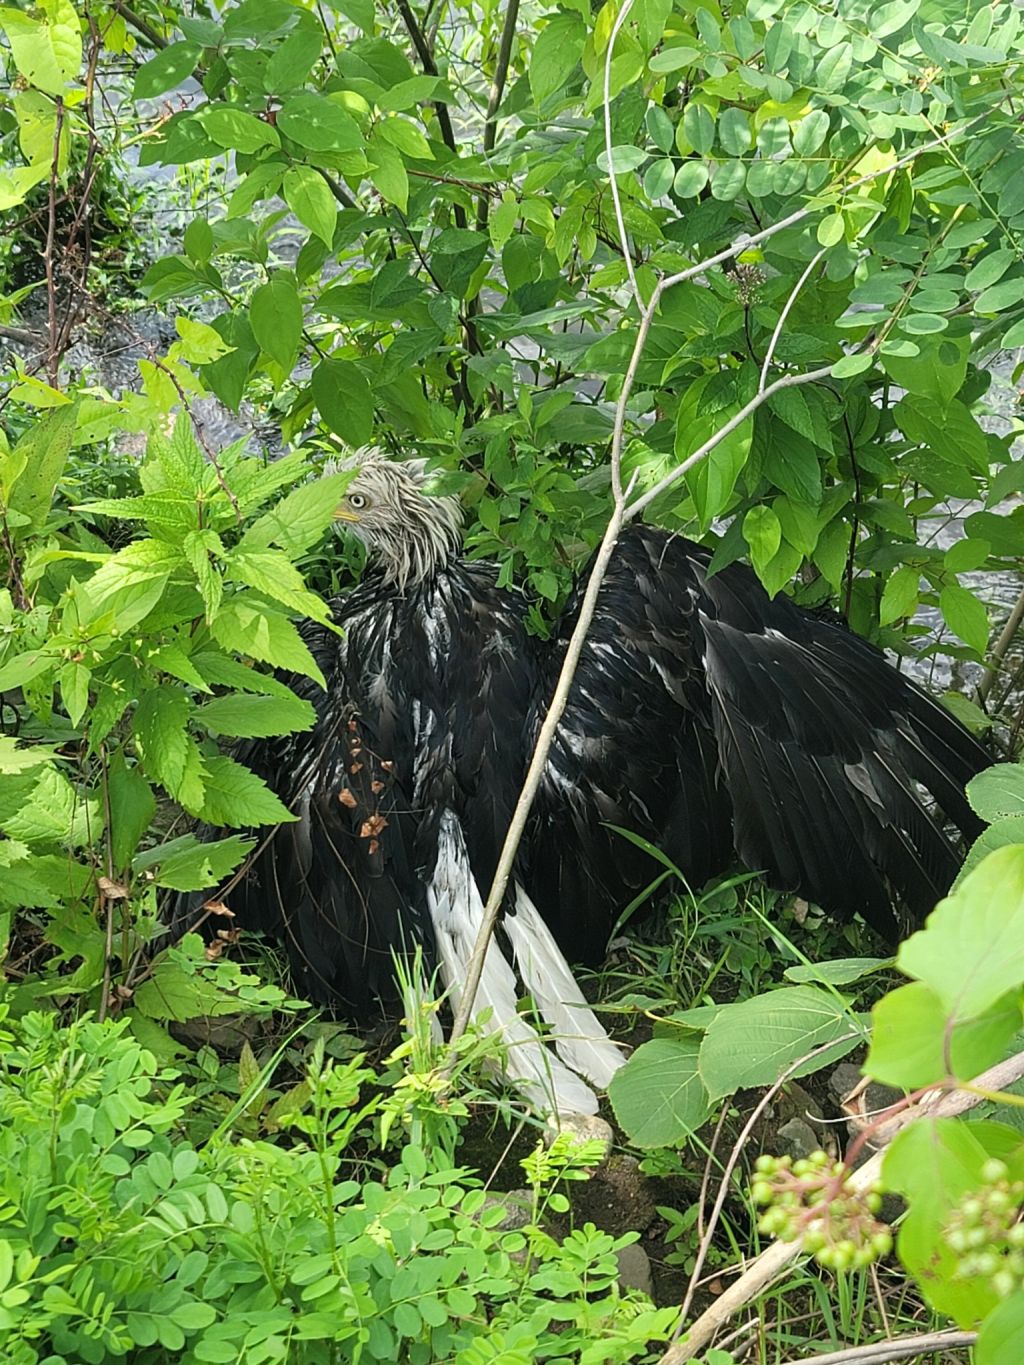 Photos: Injured bald eagle rescued from Massachusetts river bank